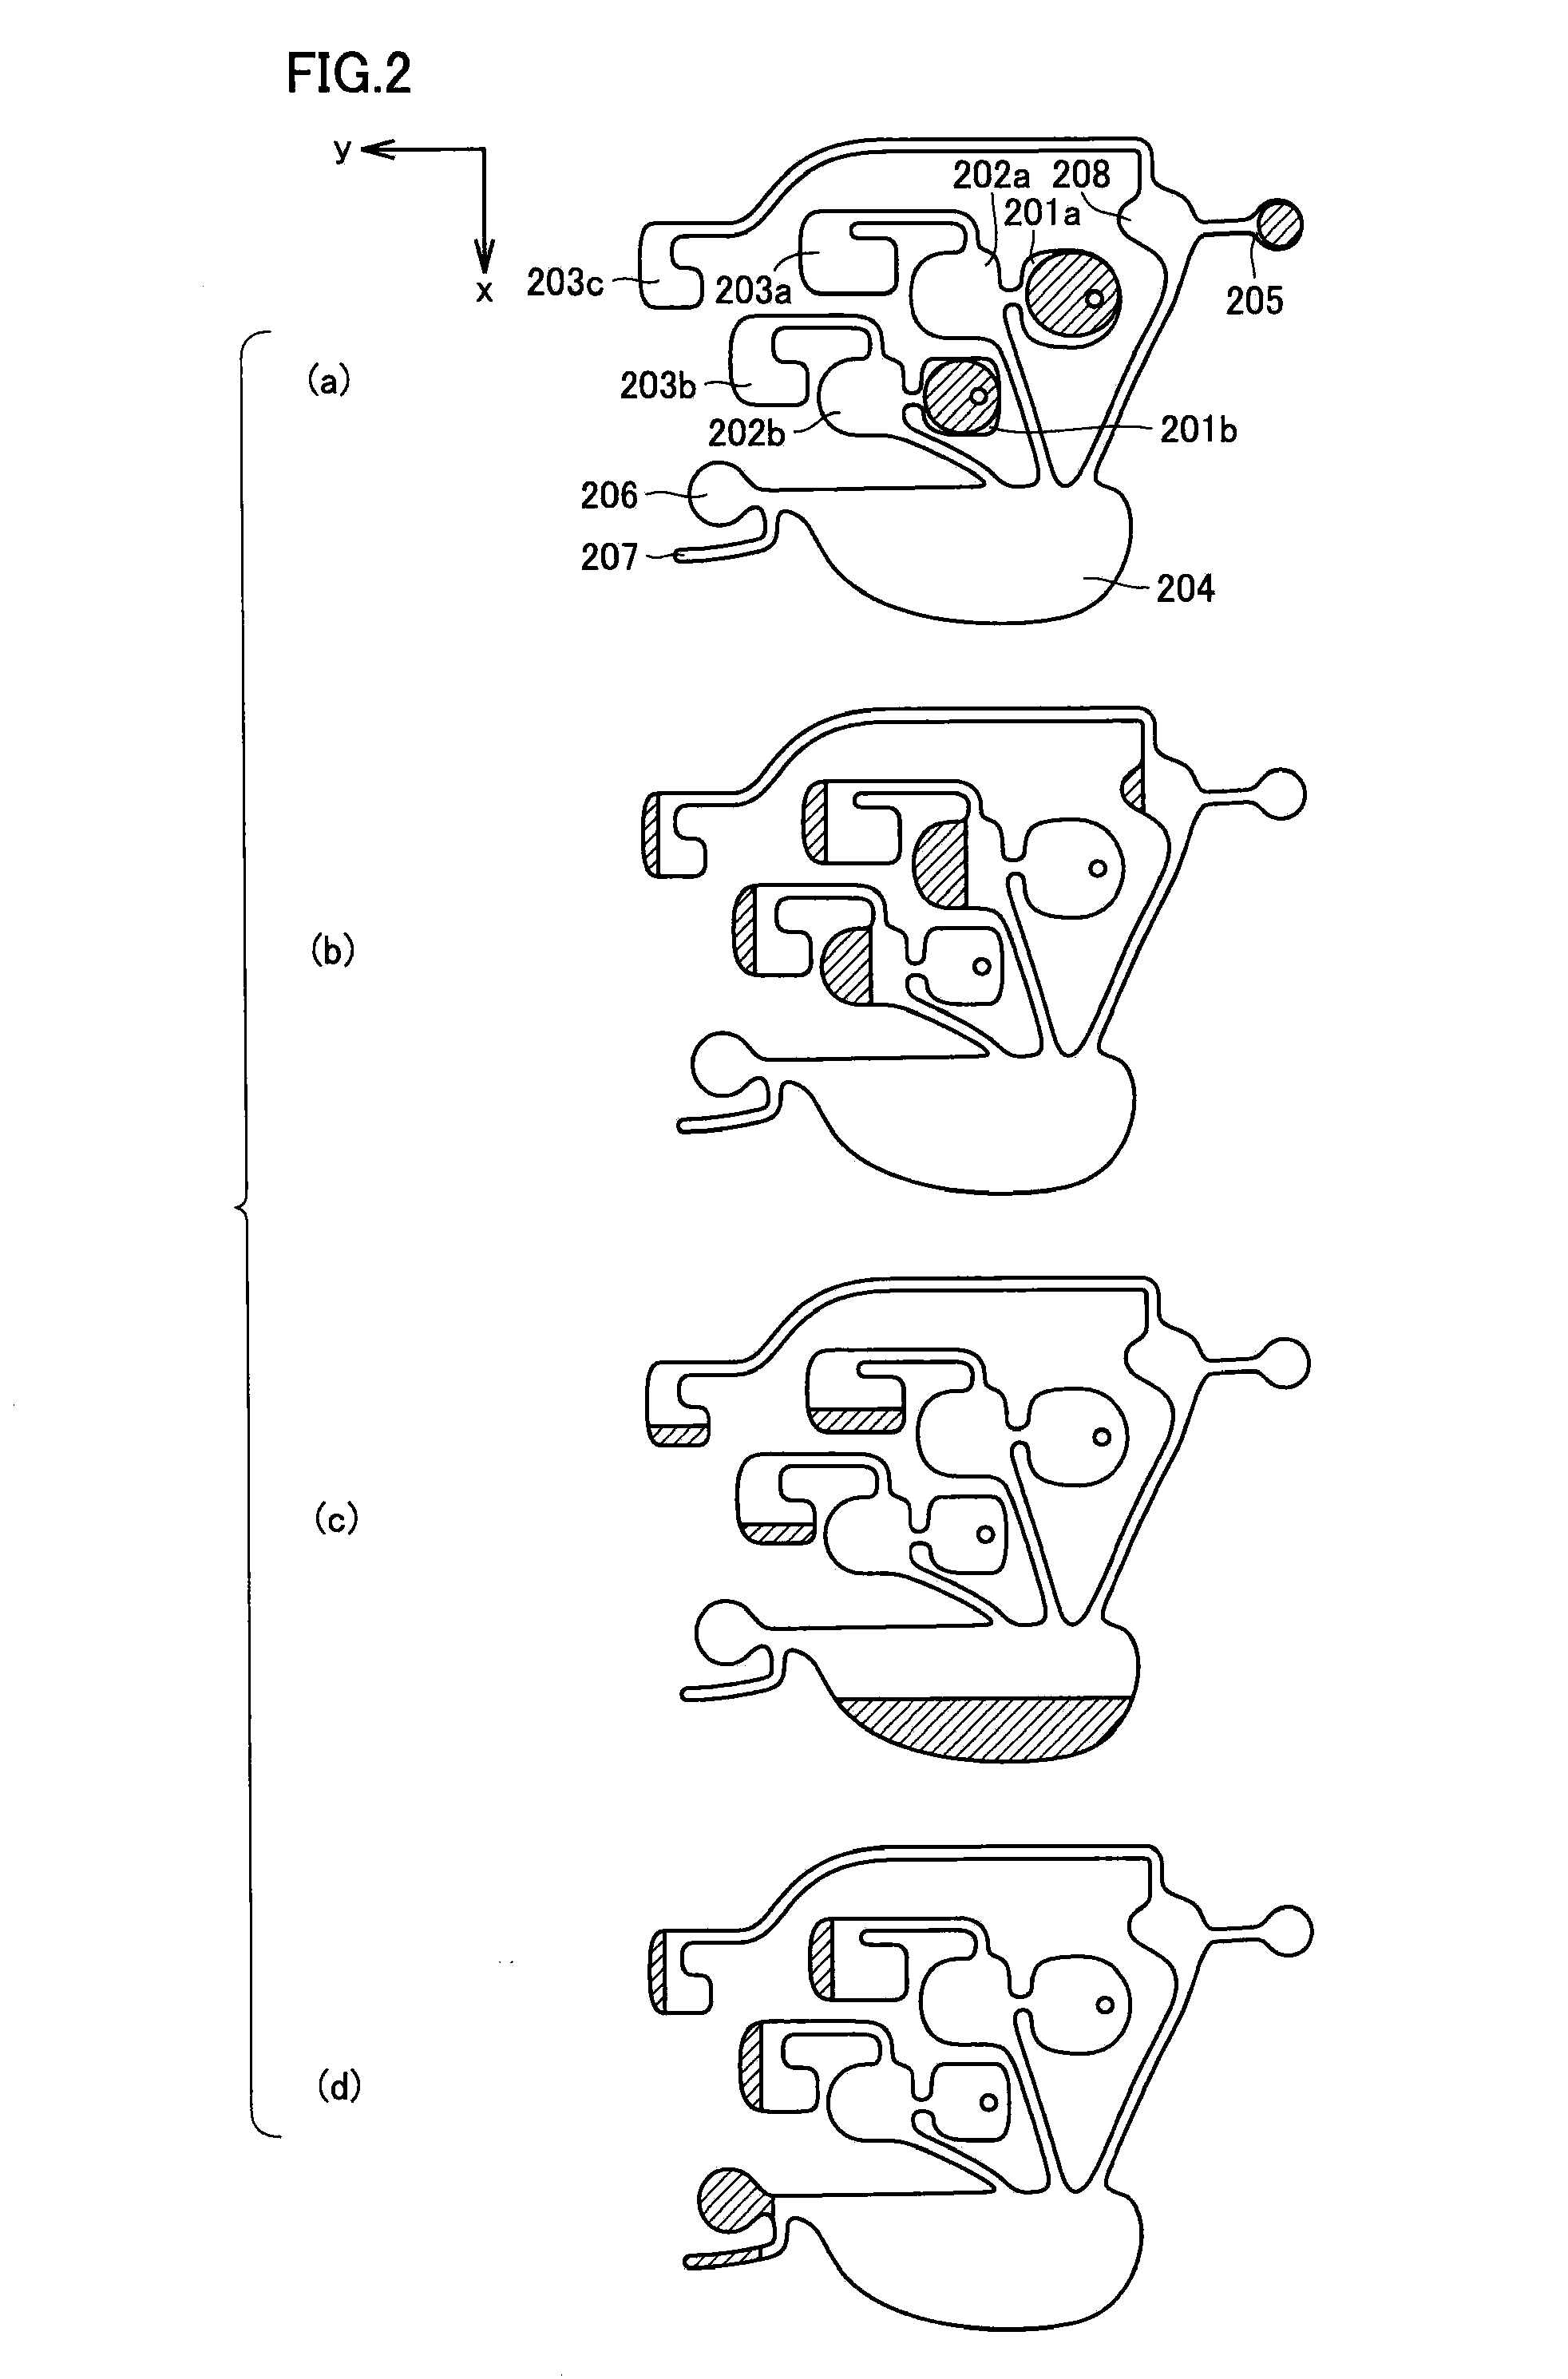 Method of Determining Whether Liquid Amount and/or Quality of Liquid Reagent Are/Is Normal in Liquid-Reagent-Containing Microchip and Liquid-Reagent-Containing Microchip